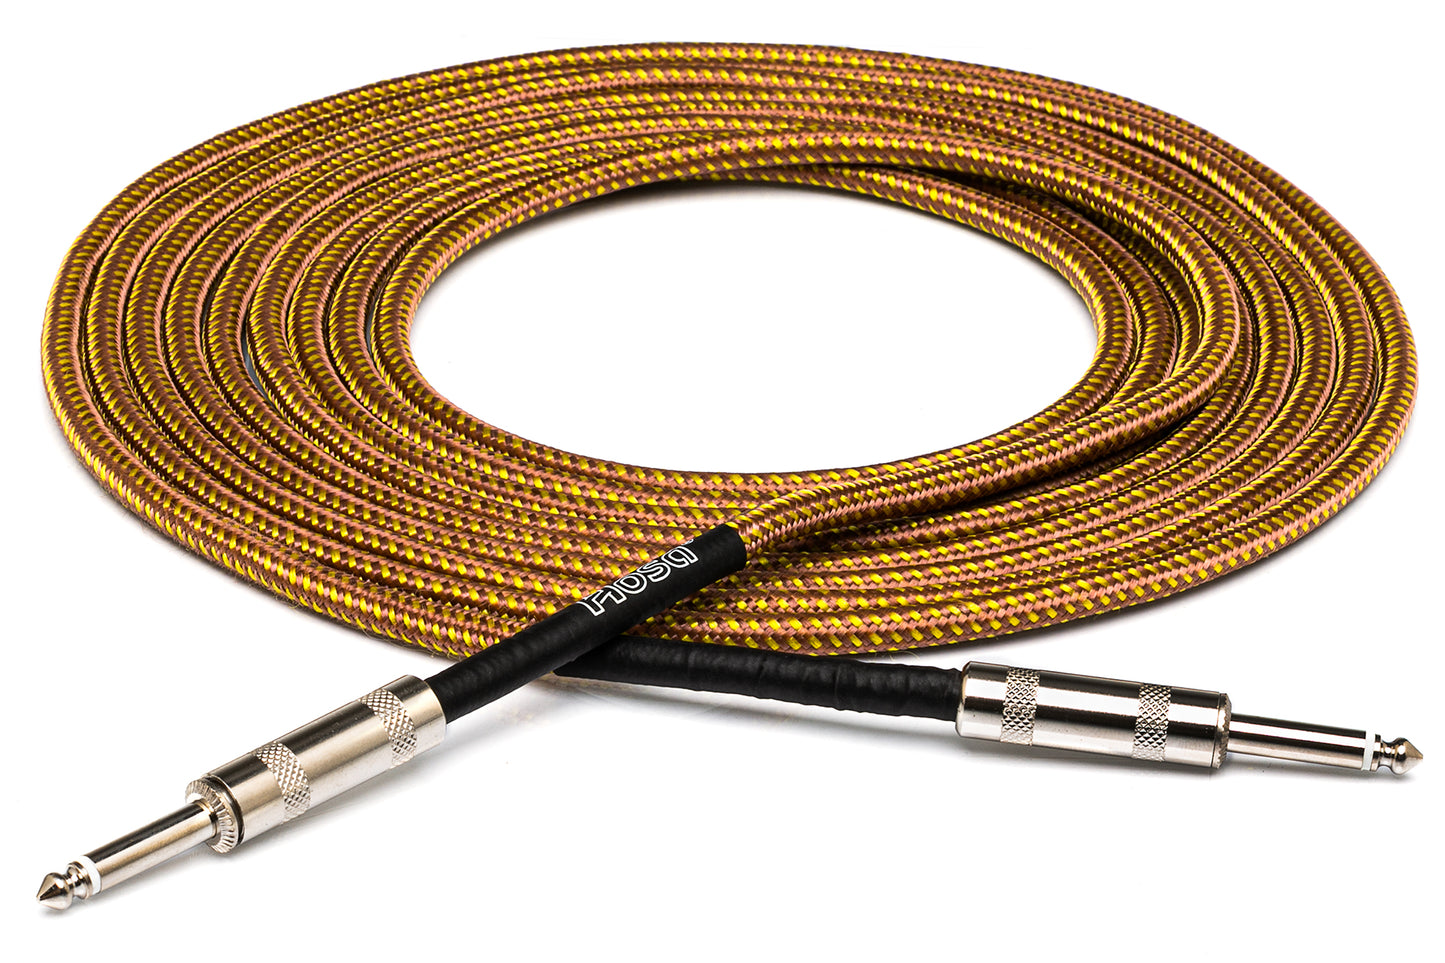 Hosa Technology GTR-518R Classic Tweed Mono 1/4 Male to 1/4 Angled Male Guitar Cable - 18'